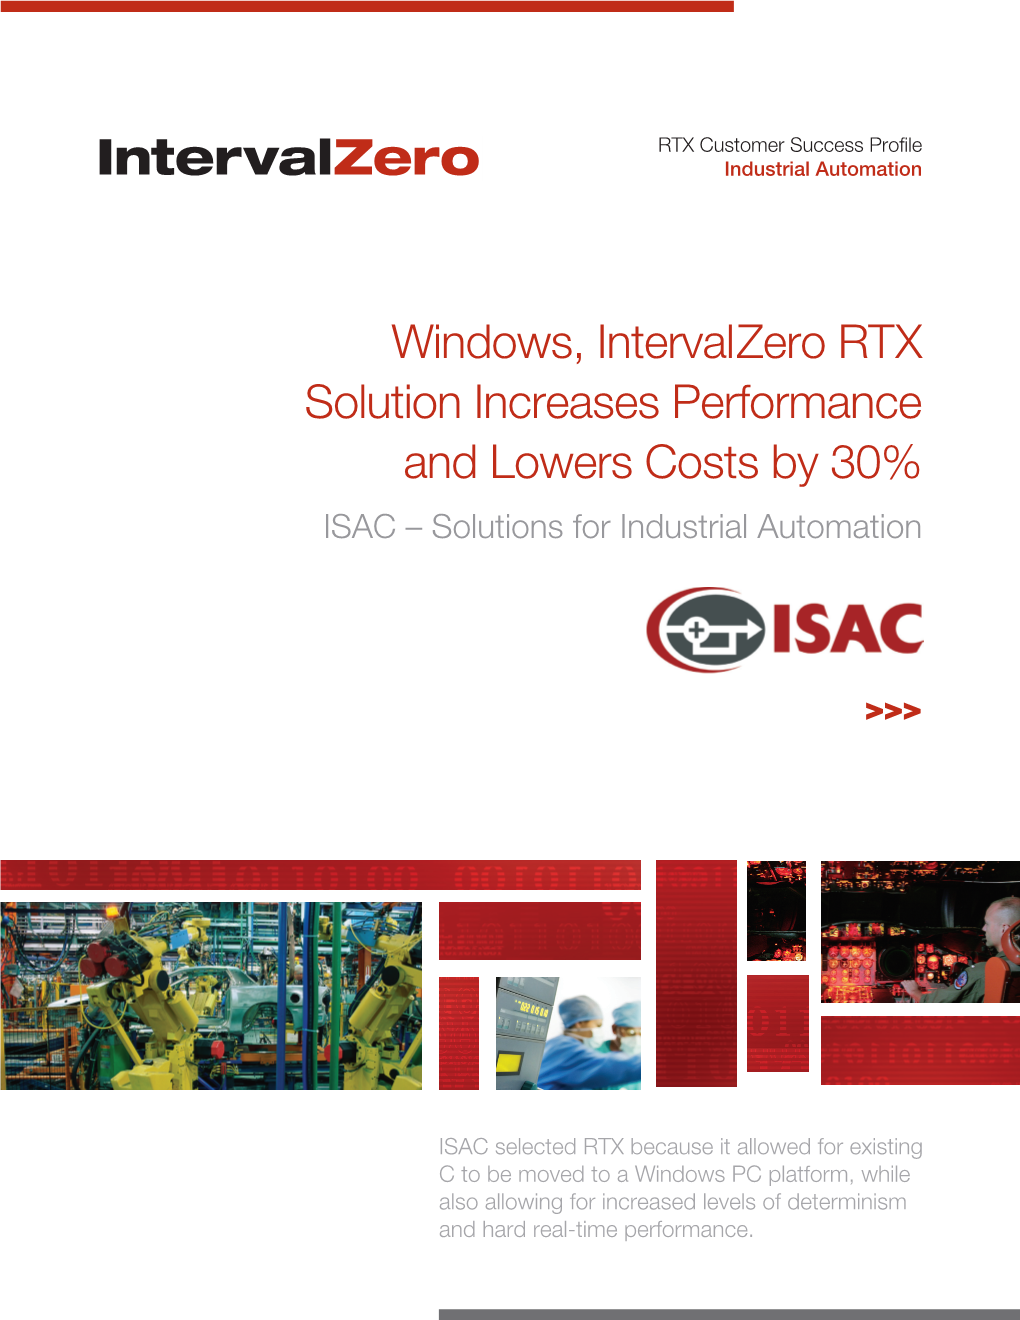 Windows, Intervalzero RTX Solution Increases Performance and Lowers Costs by 30% ISAC – Solutions for Industrial Automation